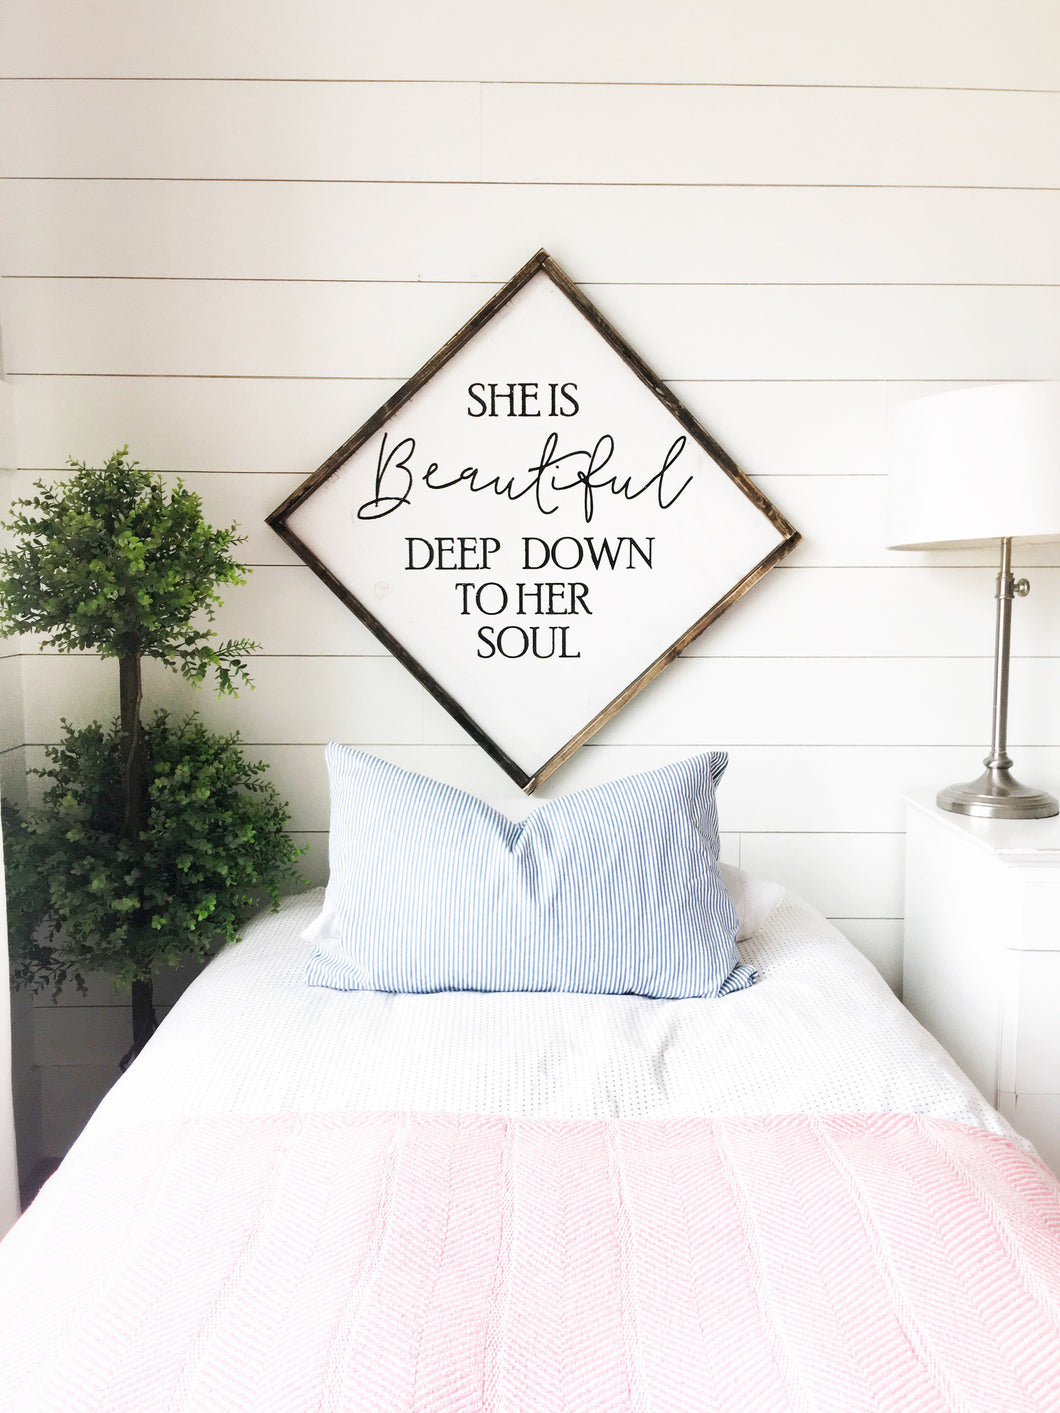 She is beautiful deep down to her soul wood sign